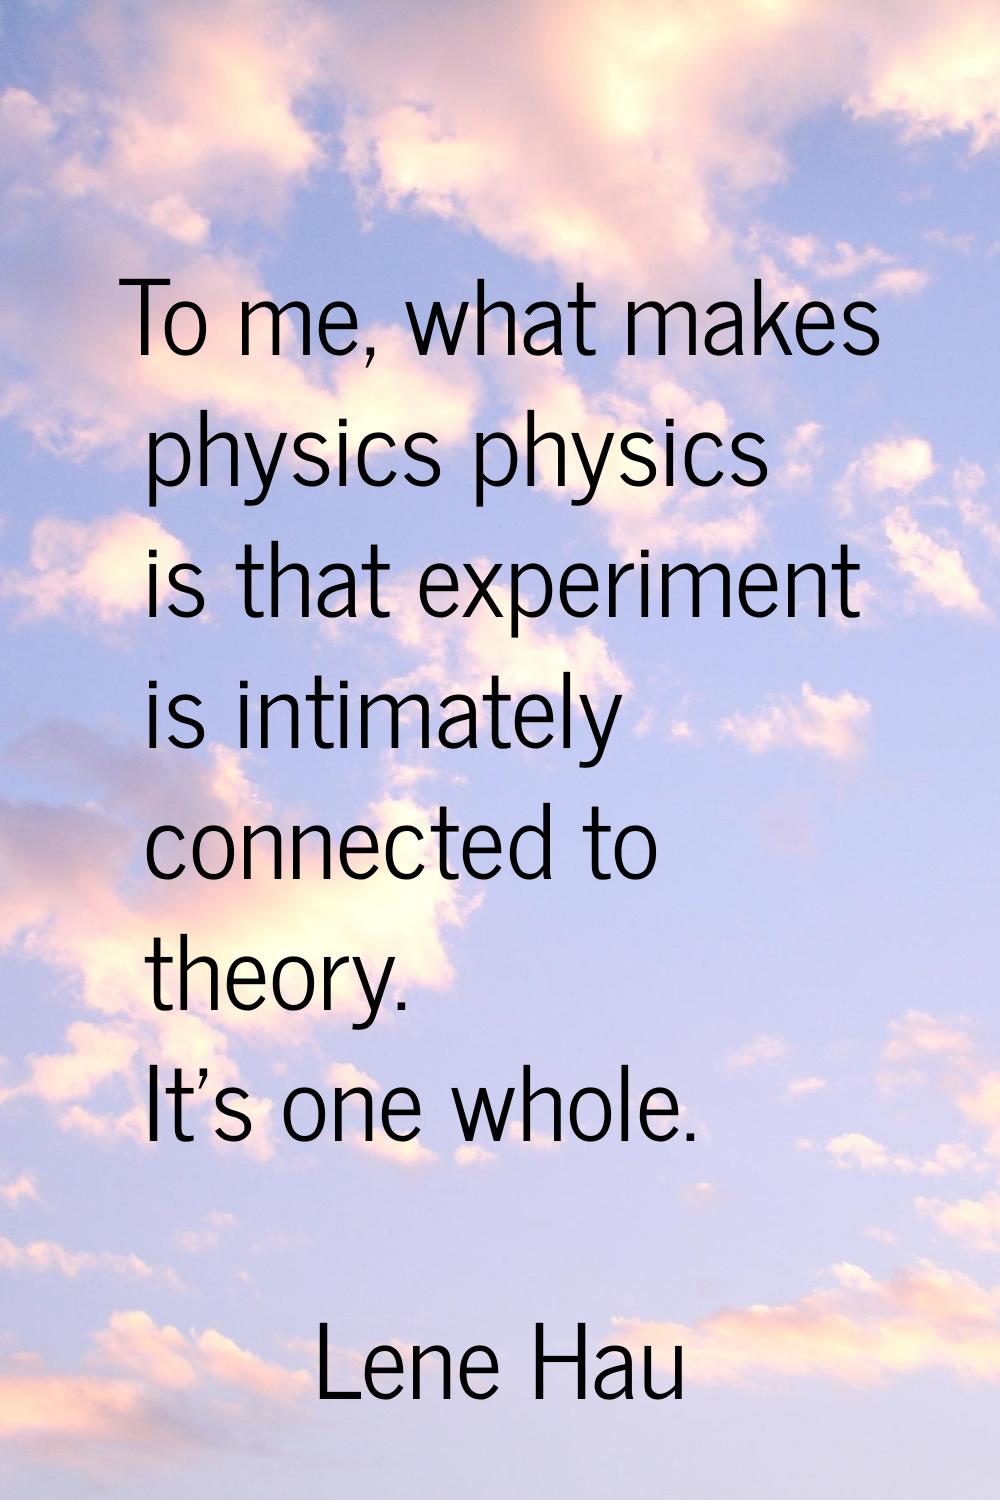 To me, what makes physics physics is that experiment is intimately connected to theory. It's one wh